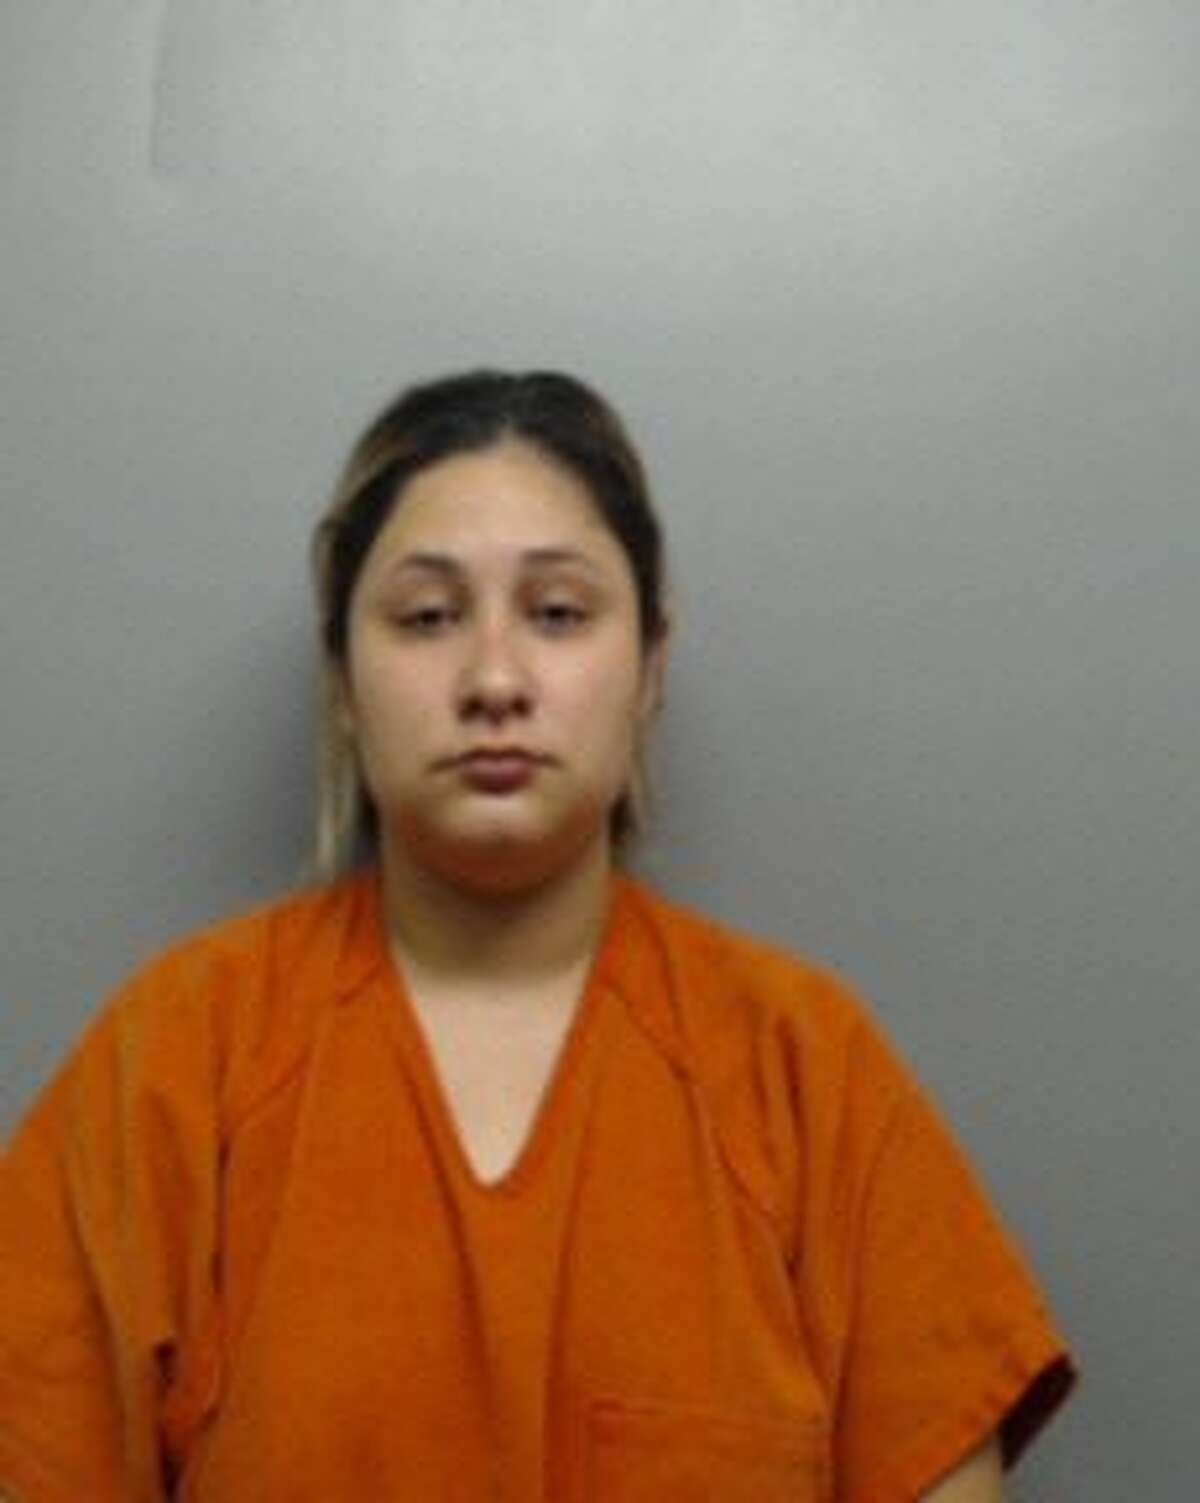 Karla Karina Ortega Camacho is facing a manslaughter charge in connection with a head-on collision that killed an 8-year-old girl on Tuesday, June 6, 2017.